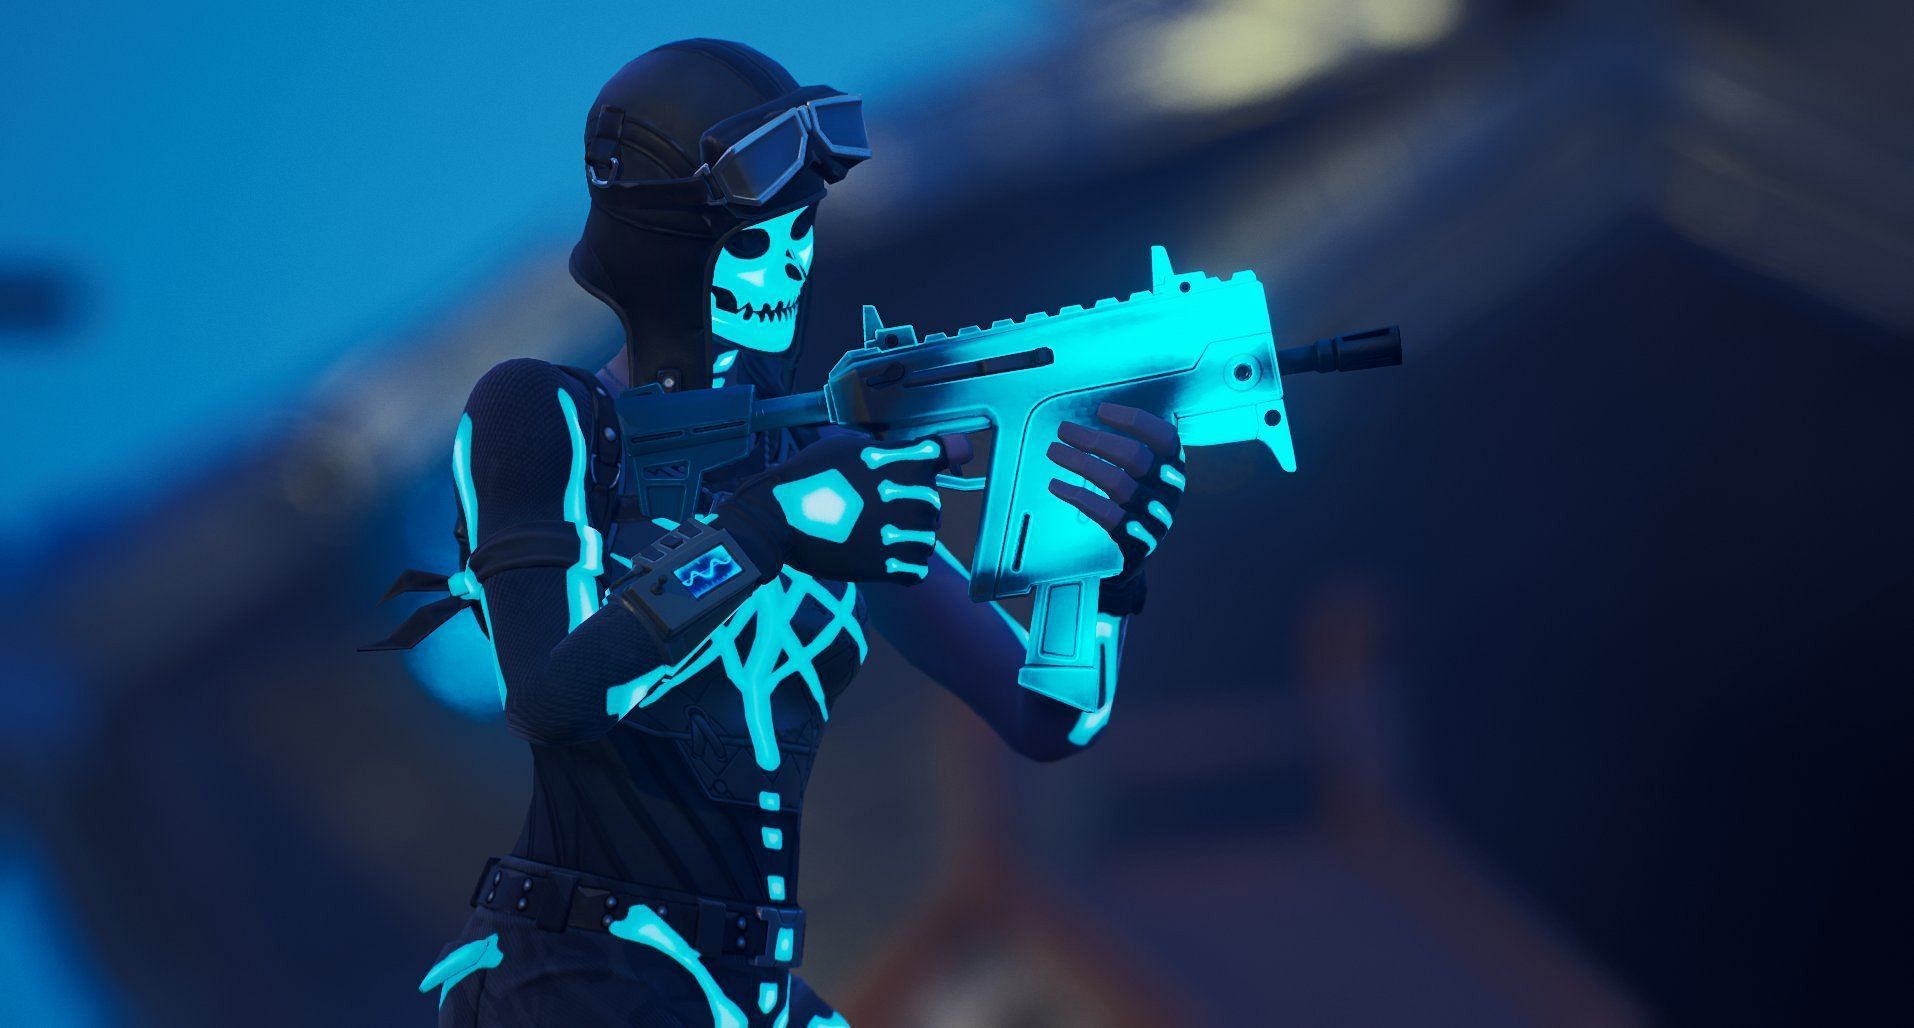 Renegade Raider Skins are some of the best in Fortnite (Image via Twitter/dadguykek)